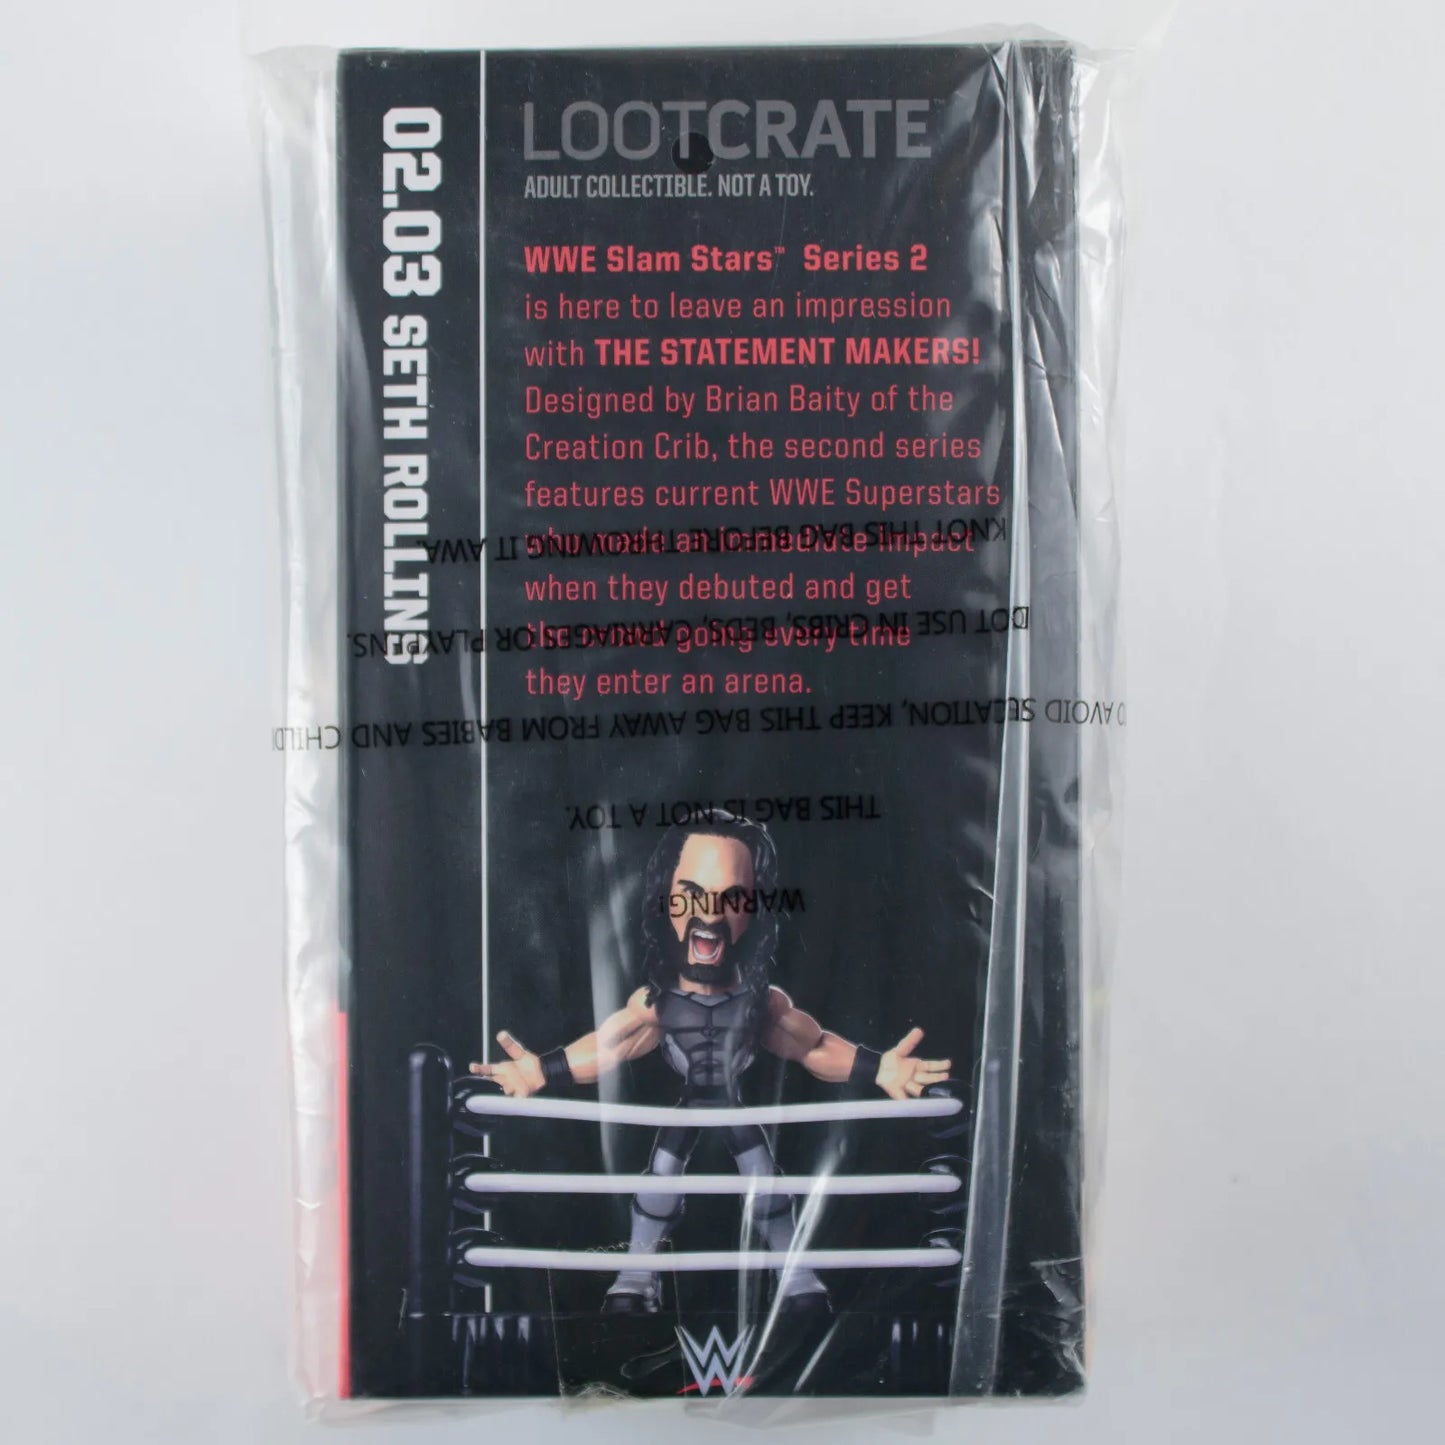 2018 WWE Loot Crate Slam Stars 2 02.03 Seth Rollins [With Black & Gold Gear]